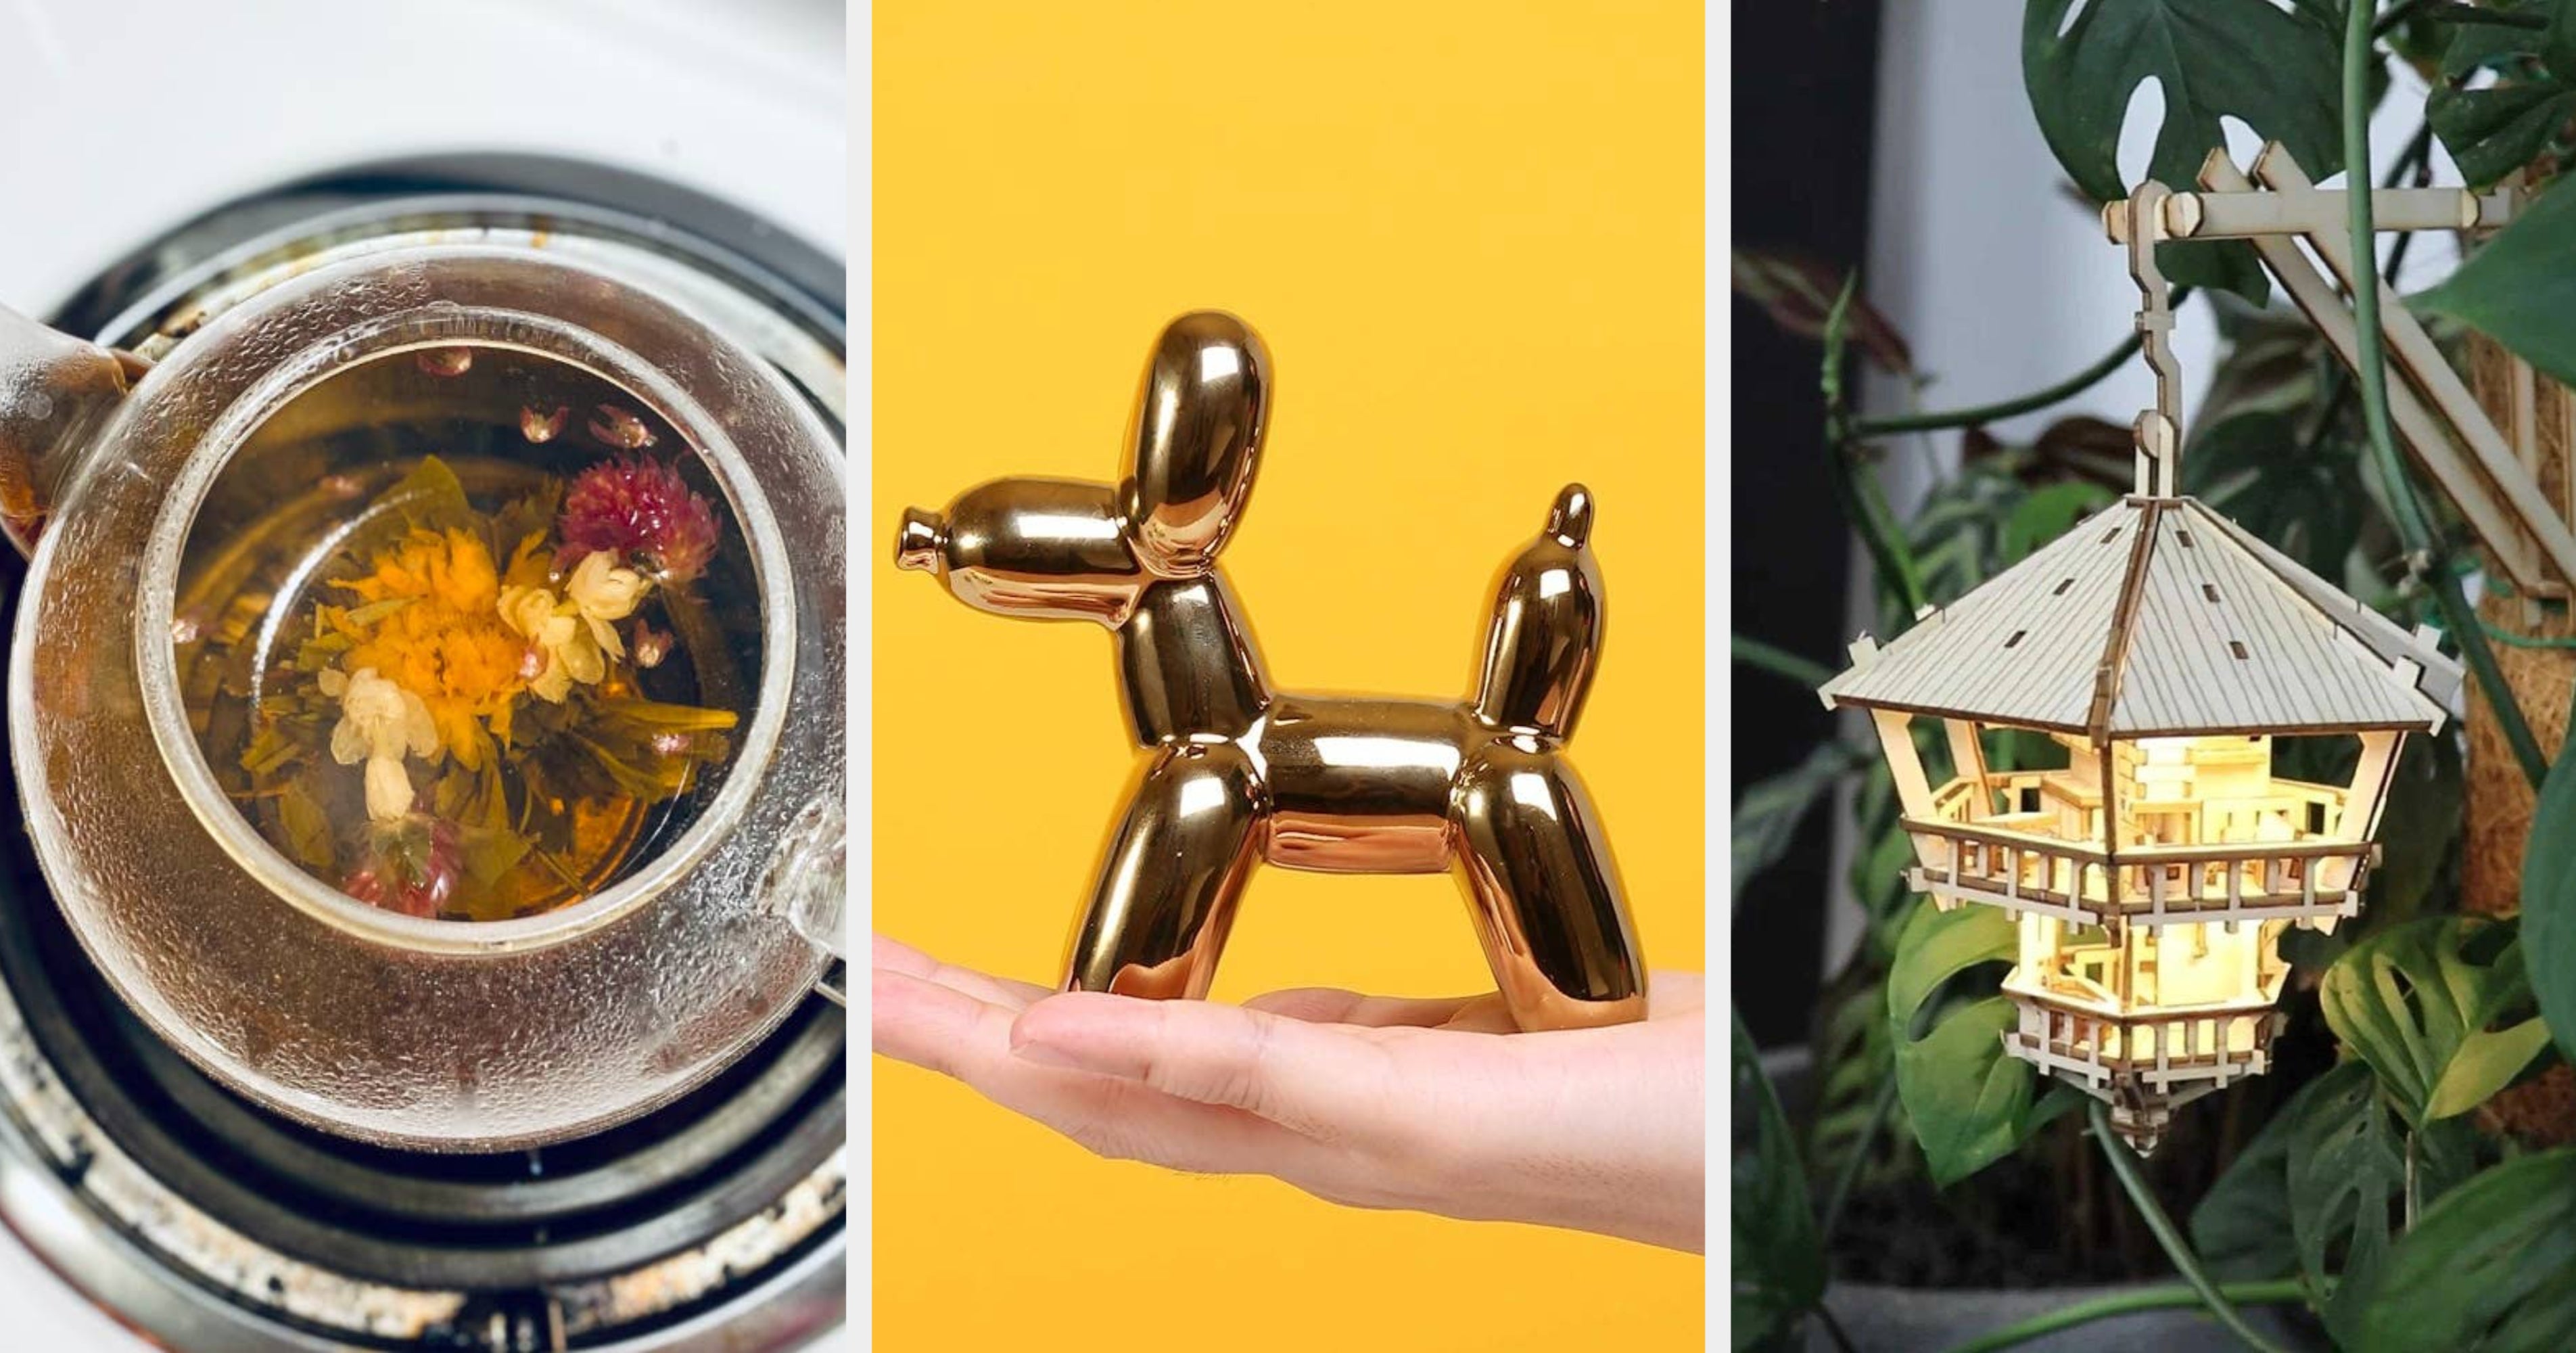 32 Cool-Looking Gifts That'll Light Up Anyone's Eyes